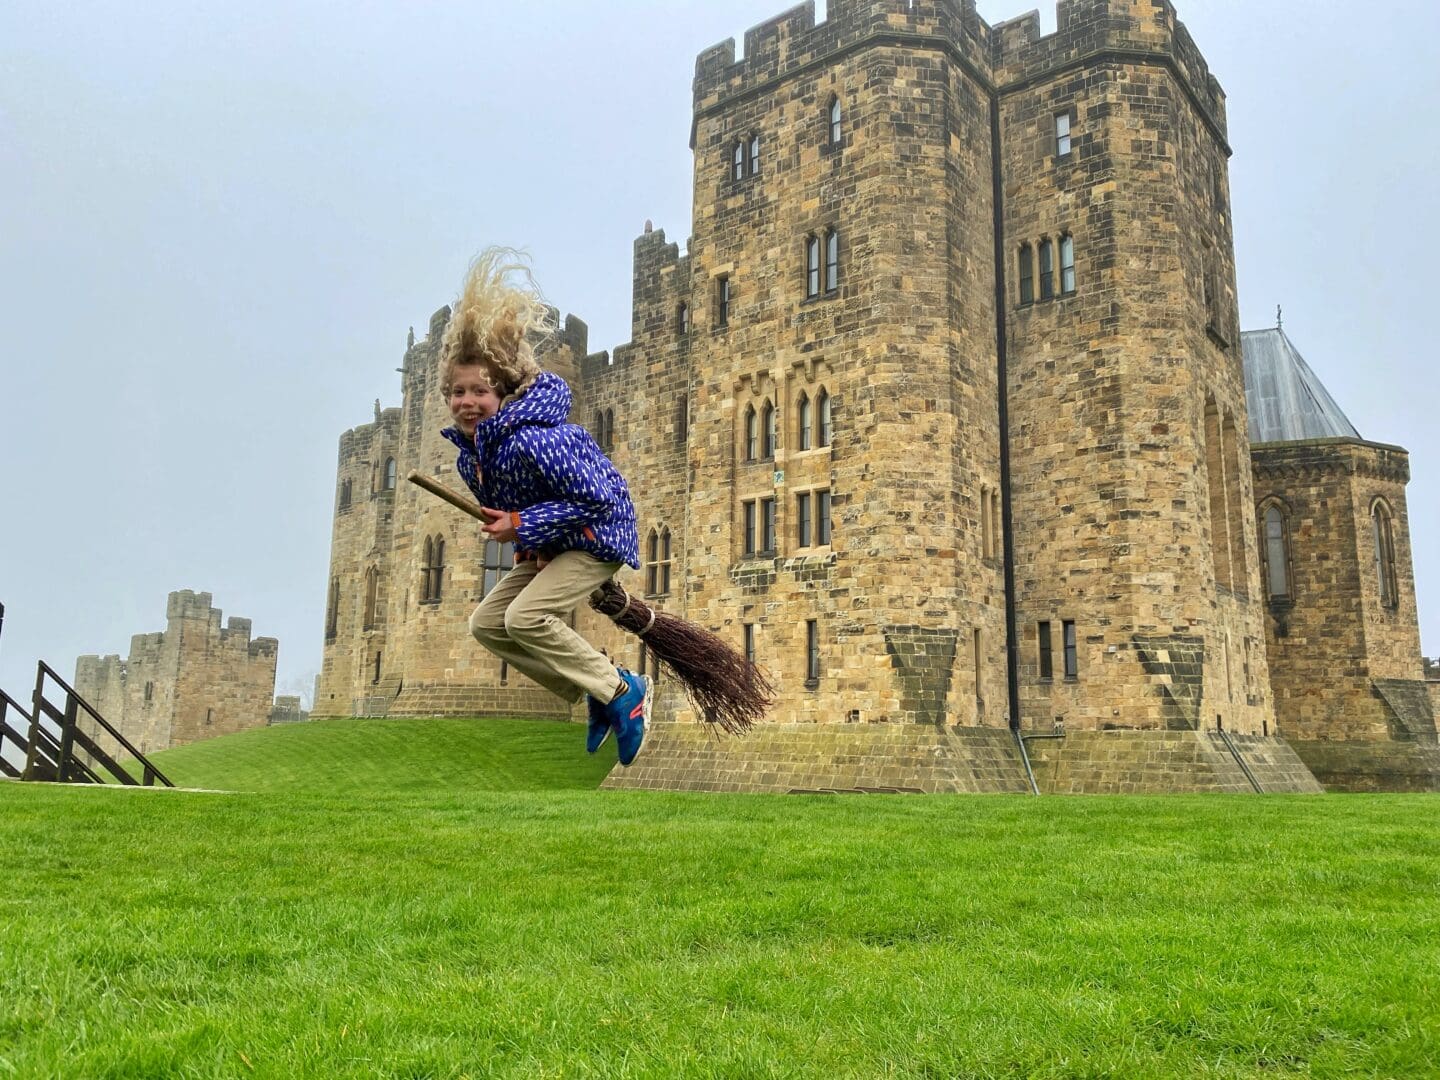 Child flying broomstick at Alnwick castle